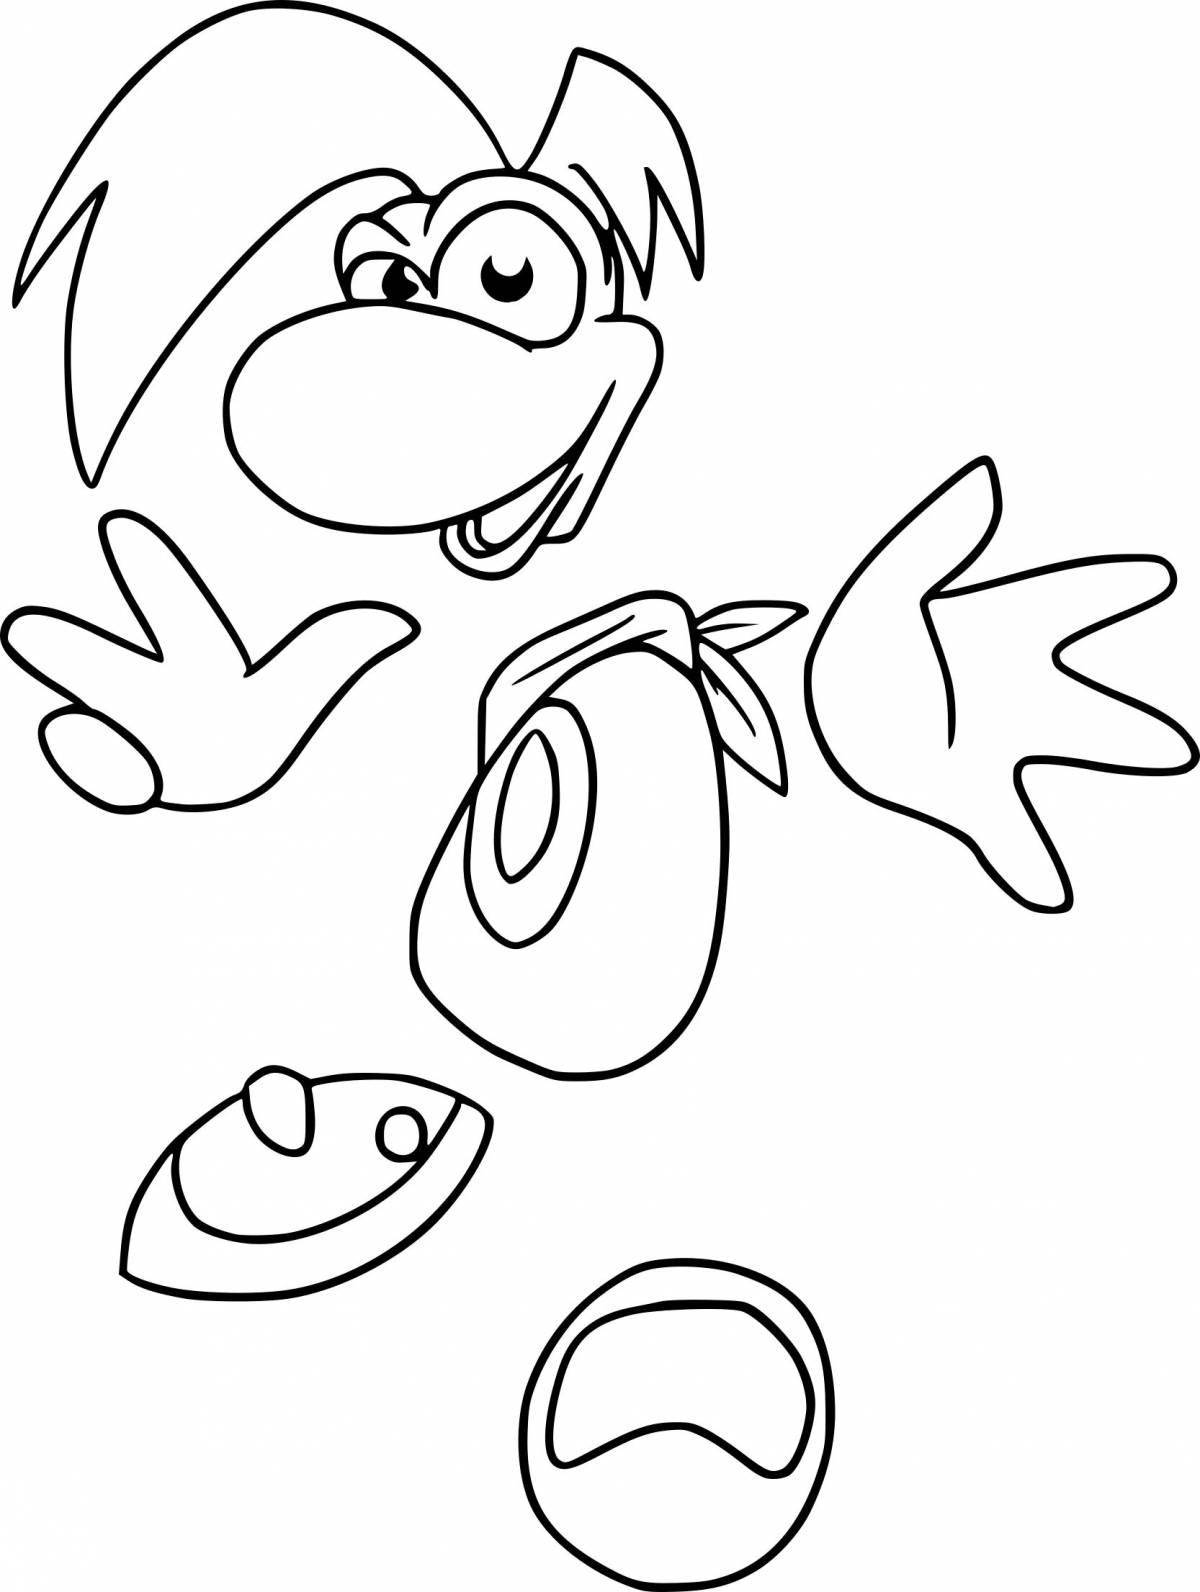 Rayman's funny coloring book